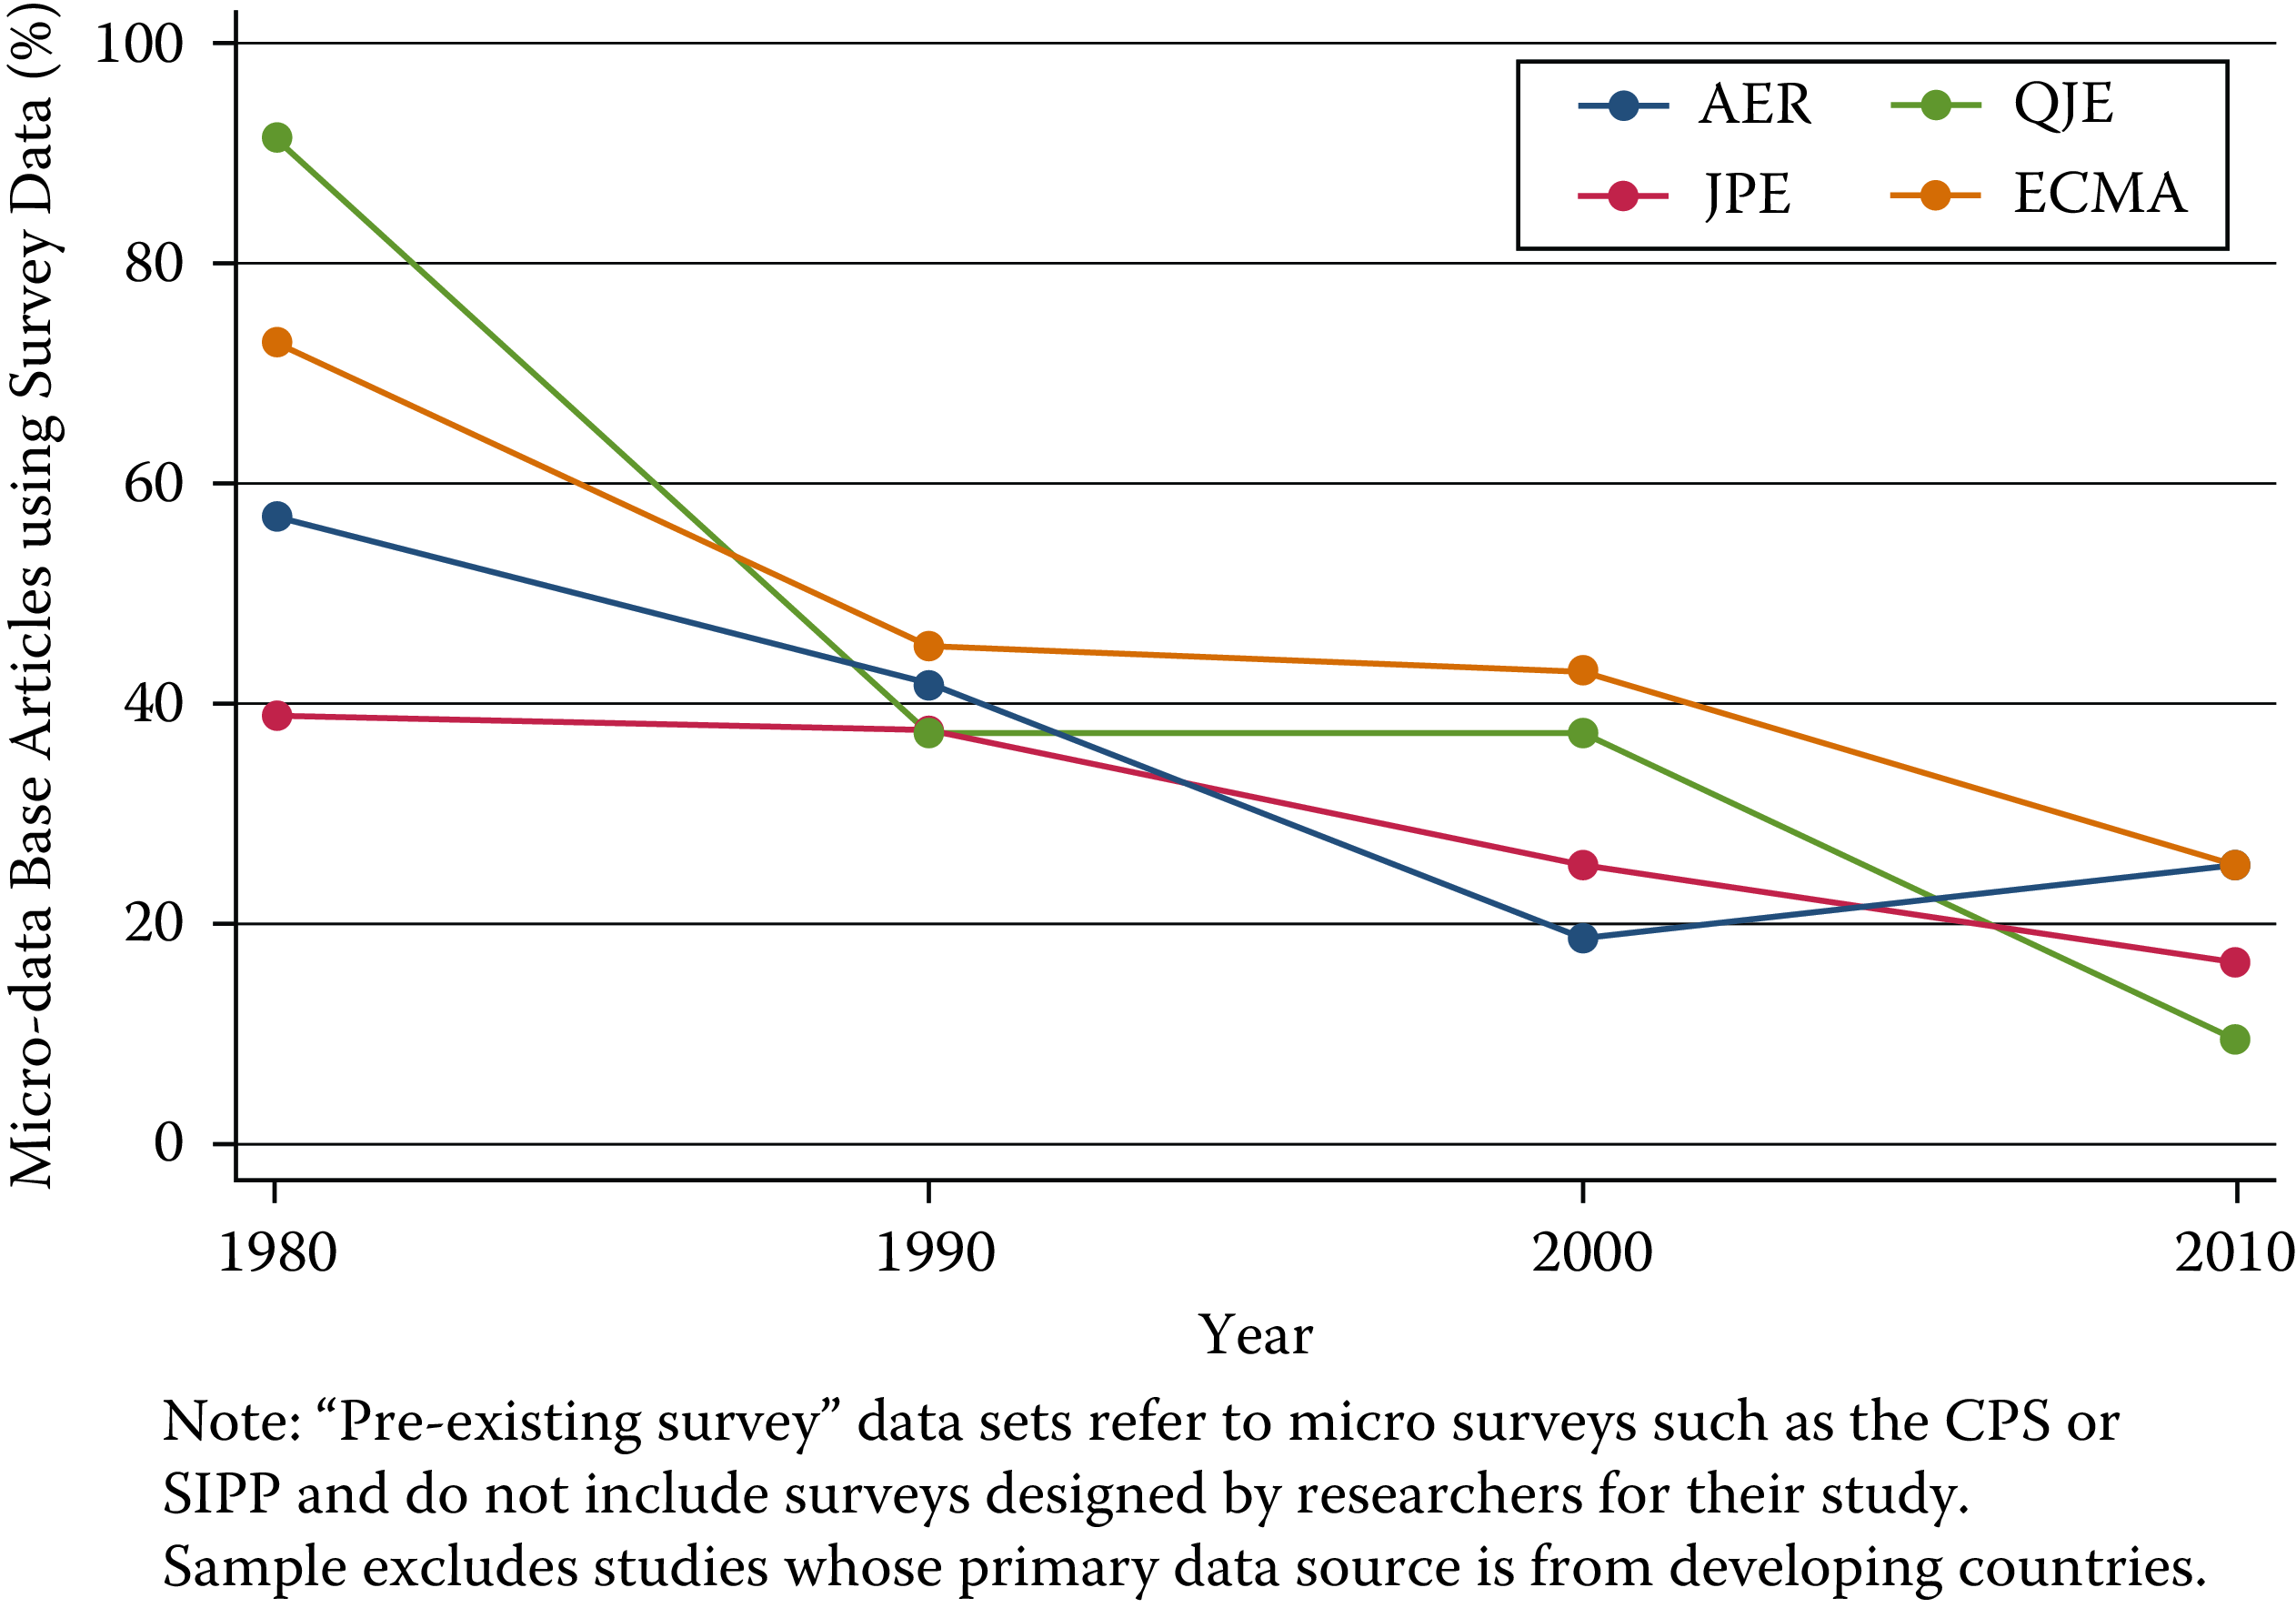 Use of pre-existing survey data in publications in leading journals, 1980--2010 [@Chetty2012]